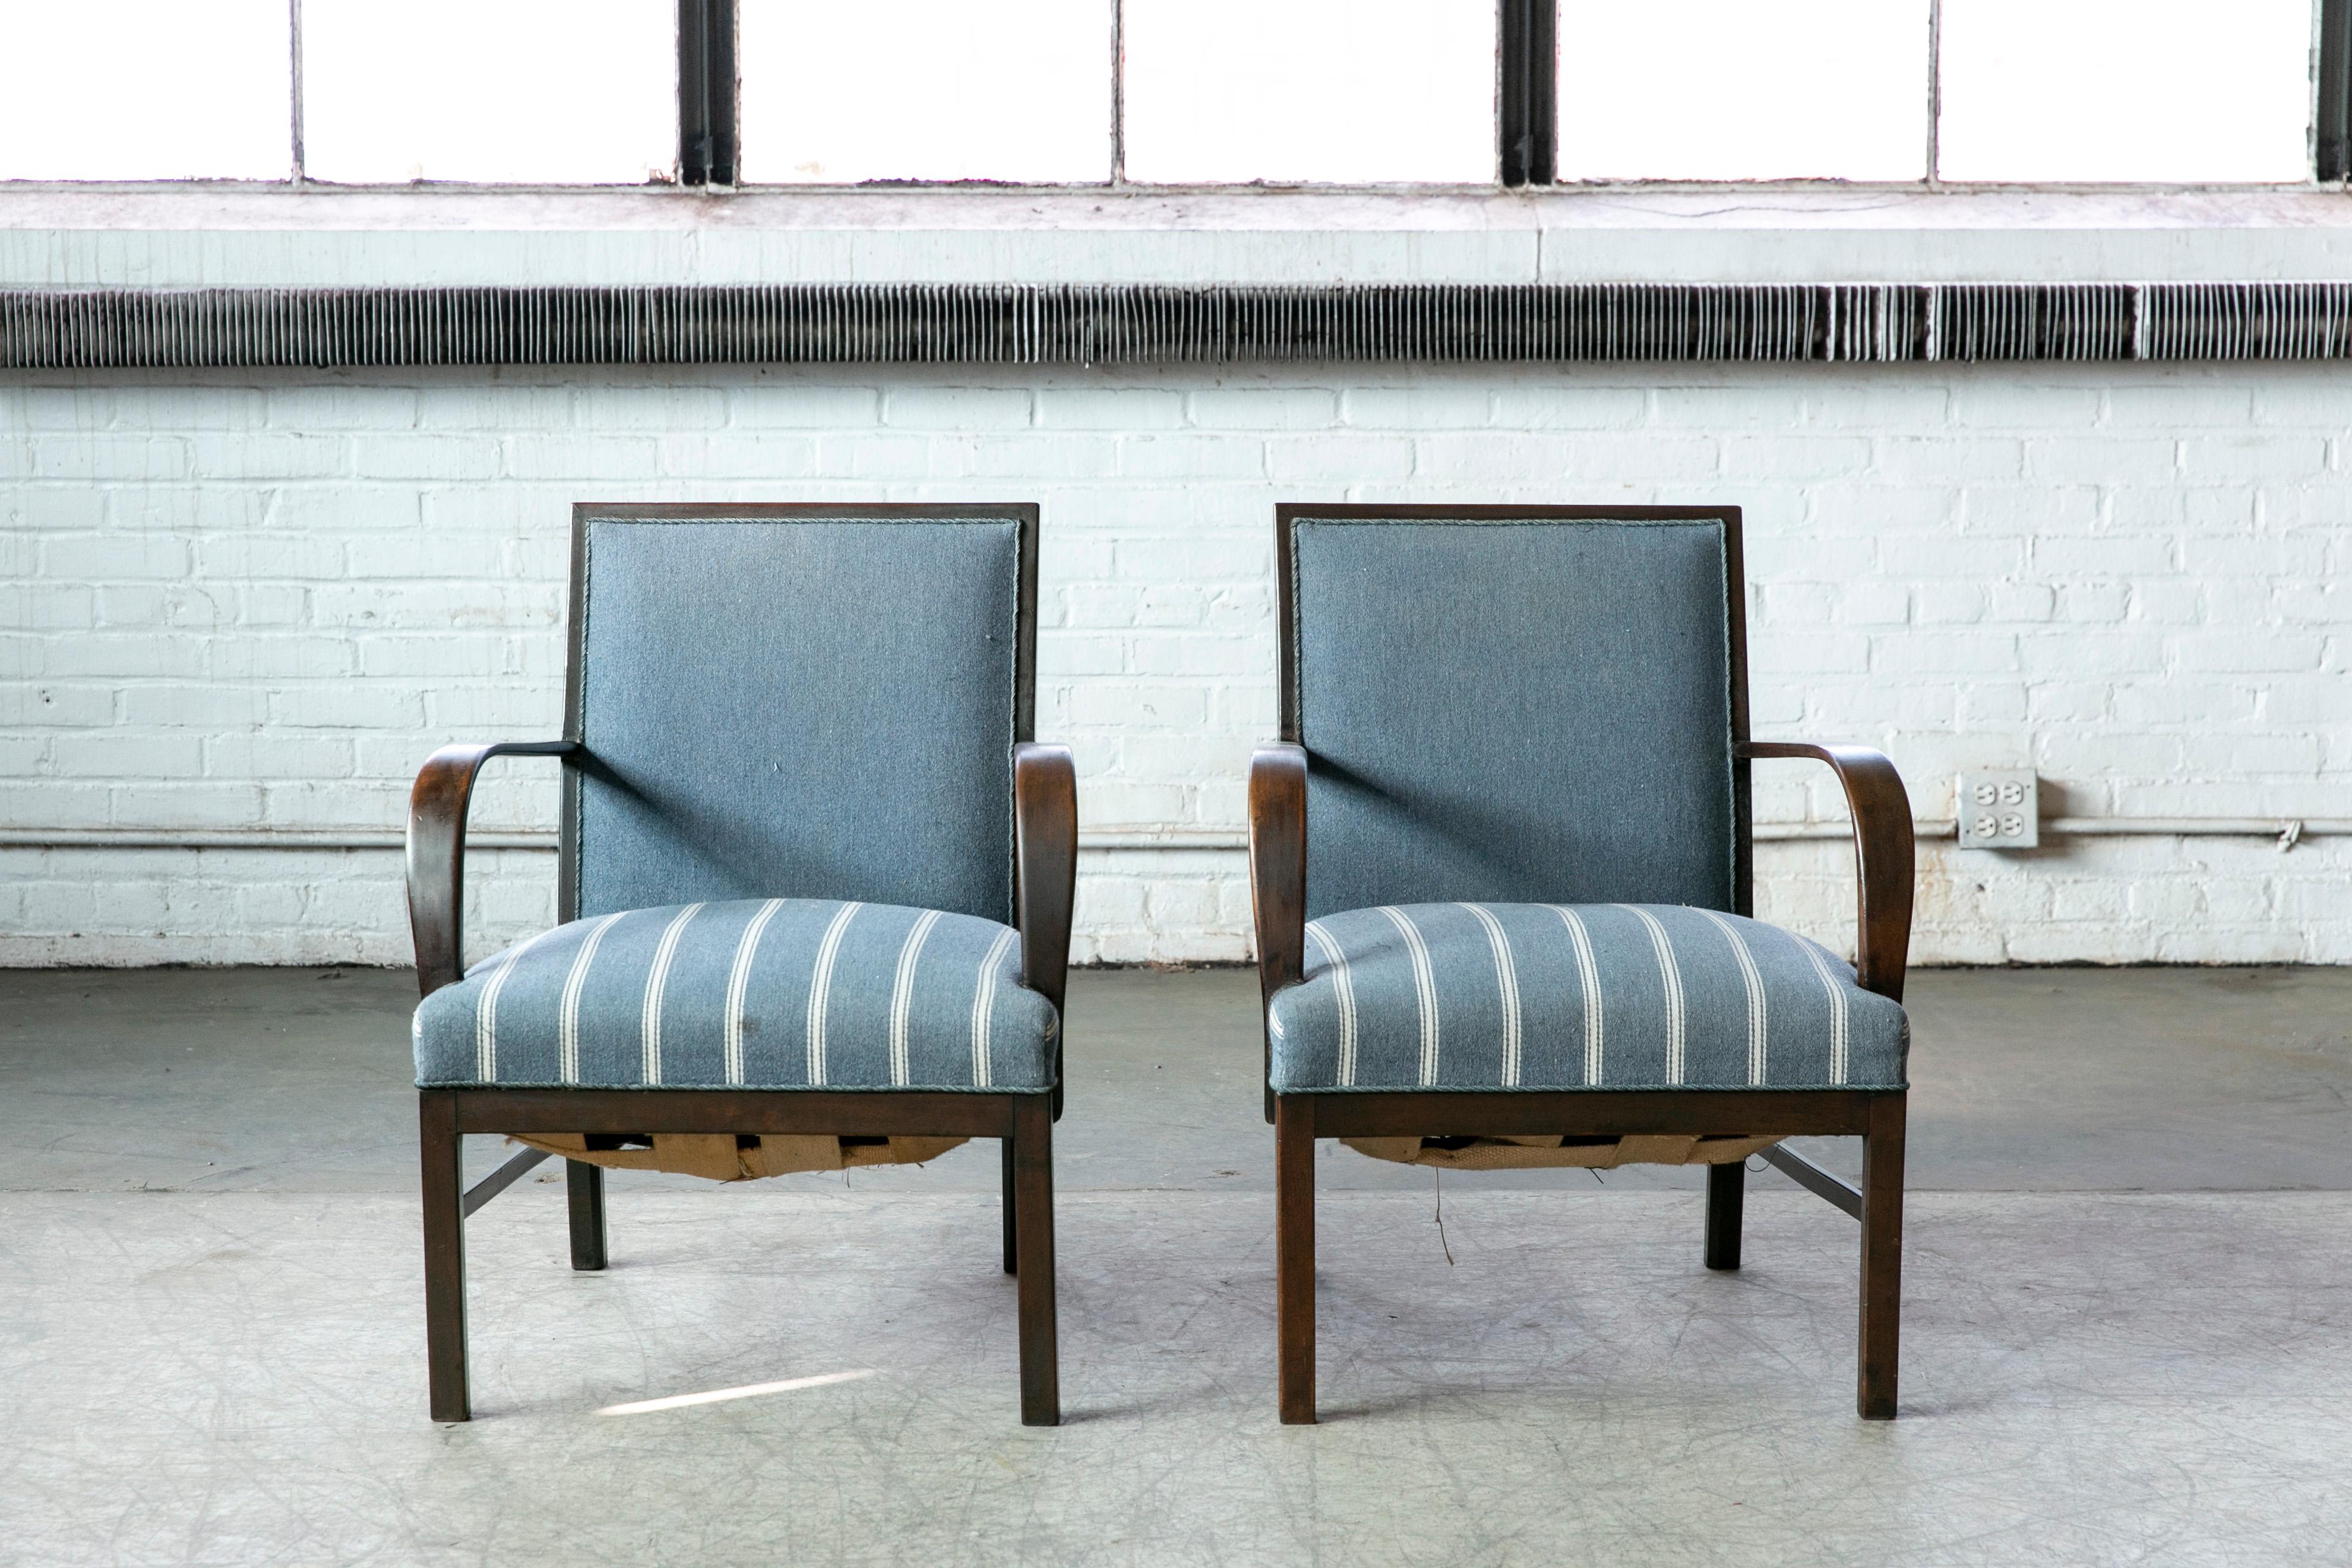 Pair of Danish Early Midcentury or Art Deco Low Lounge Chairs Mahagony, 1940's In Good Condition For Sale In Bridgeport, CT